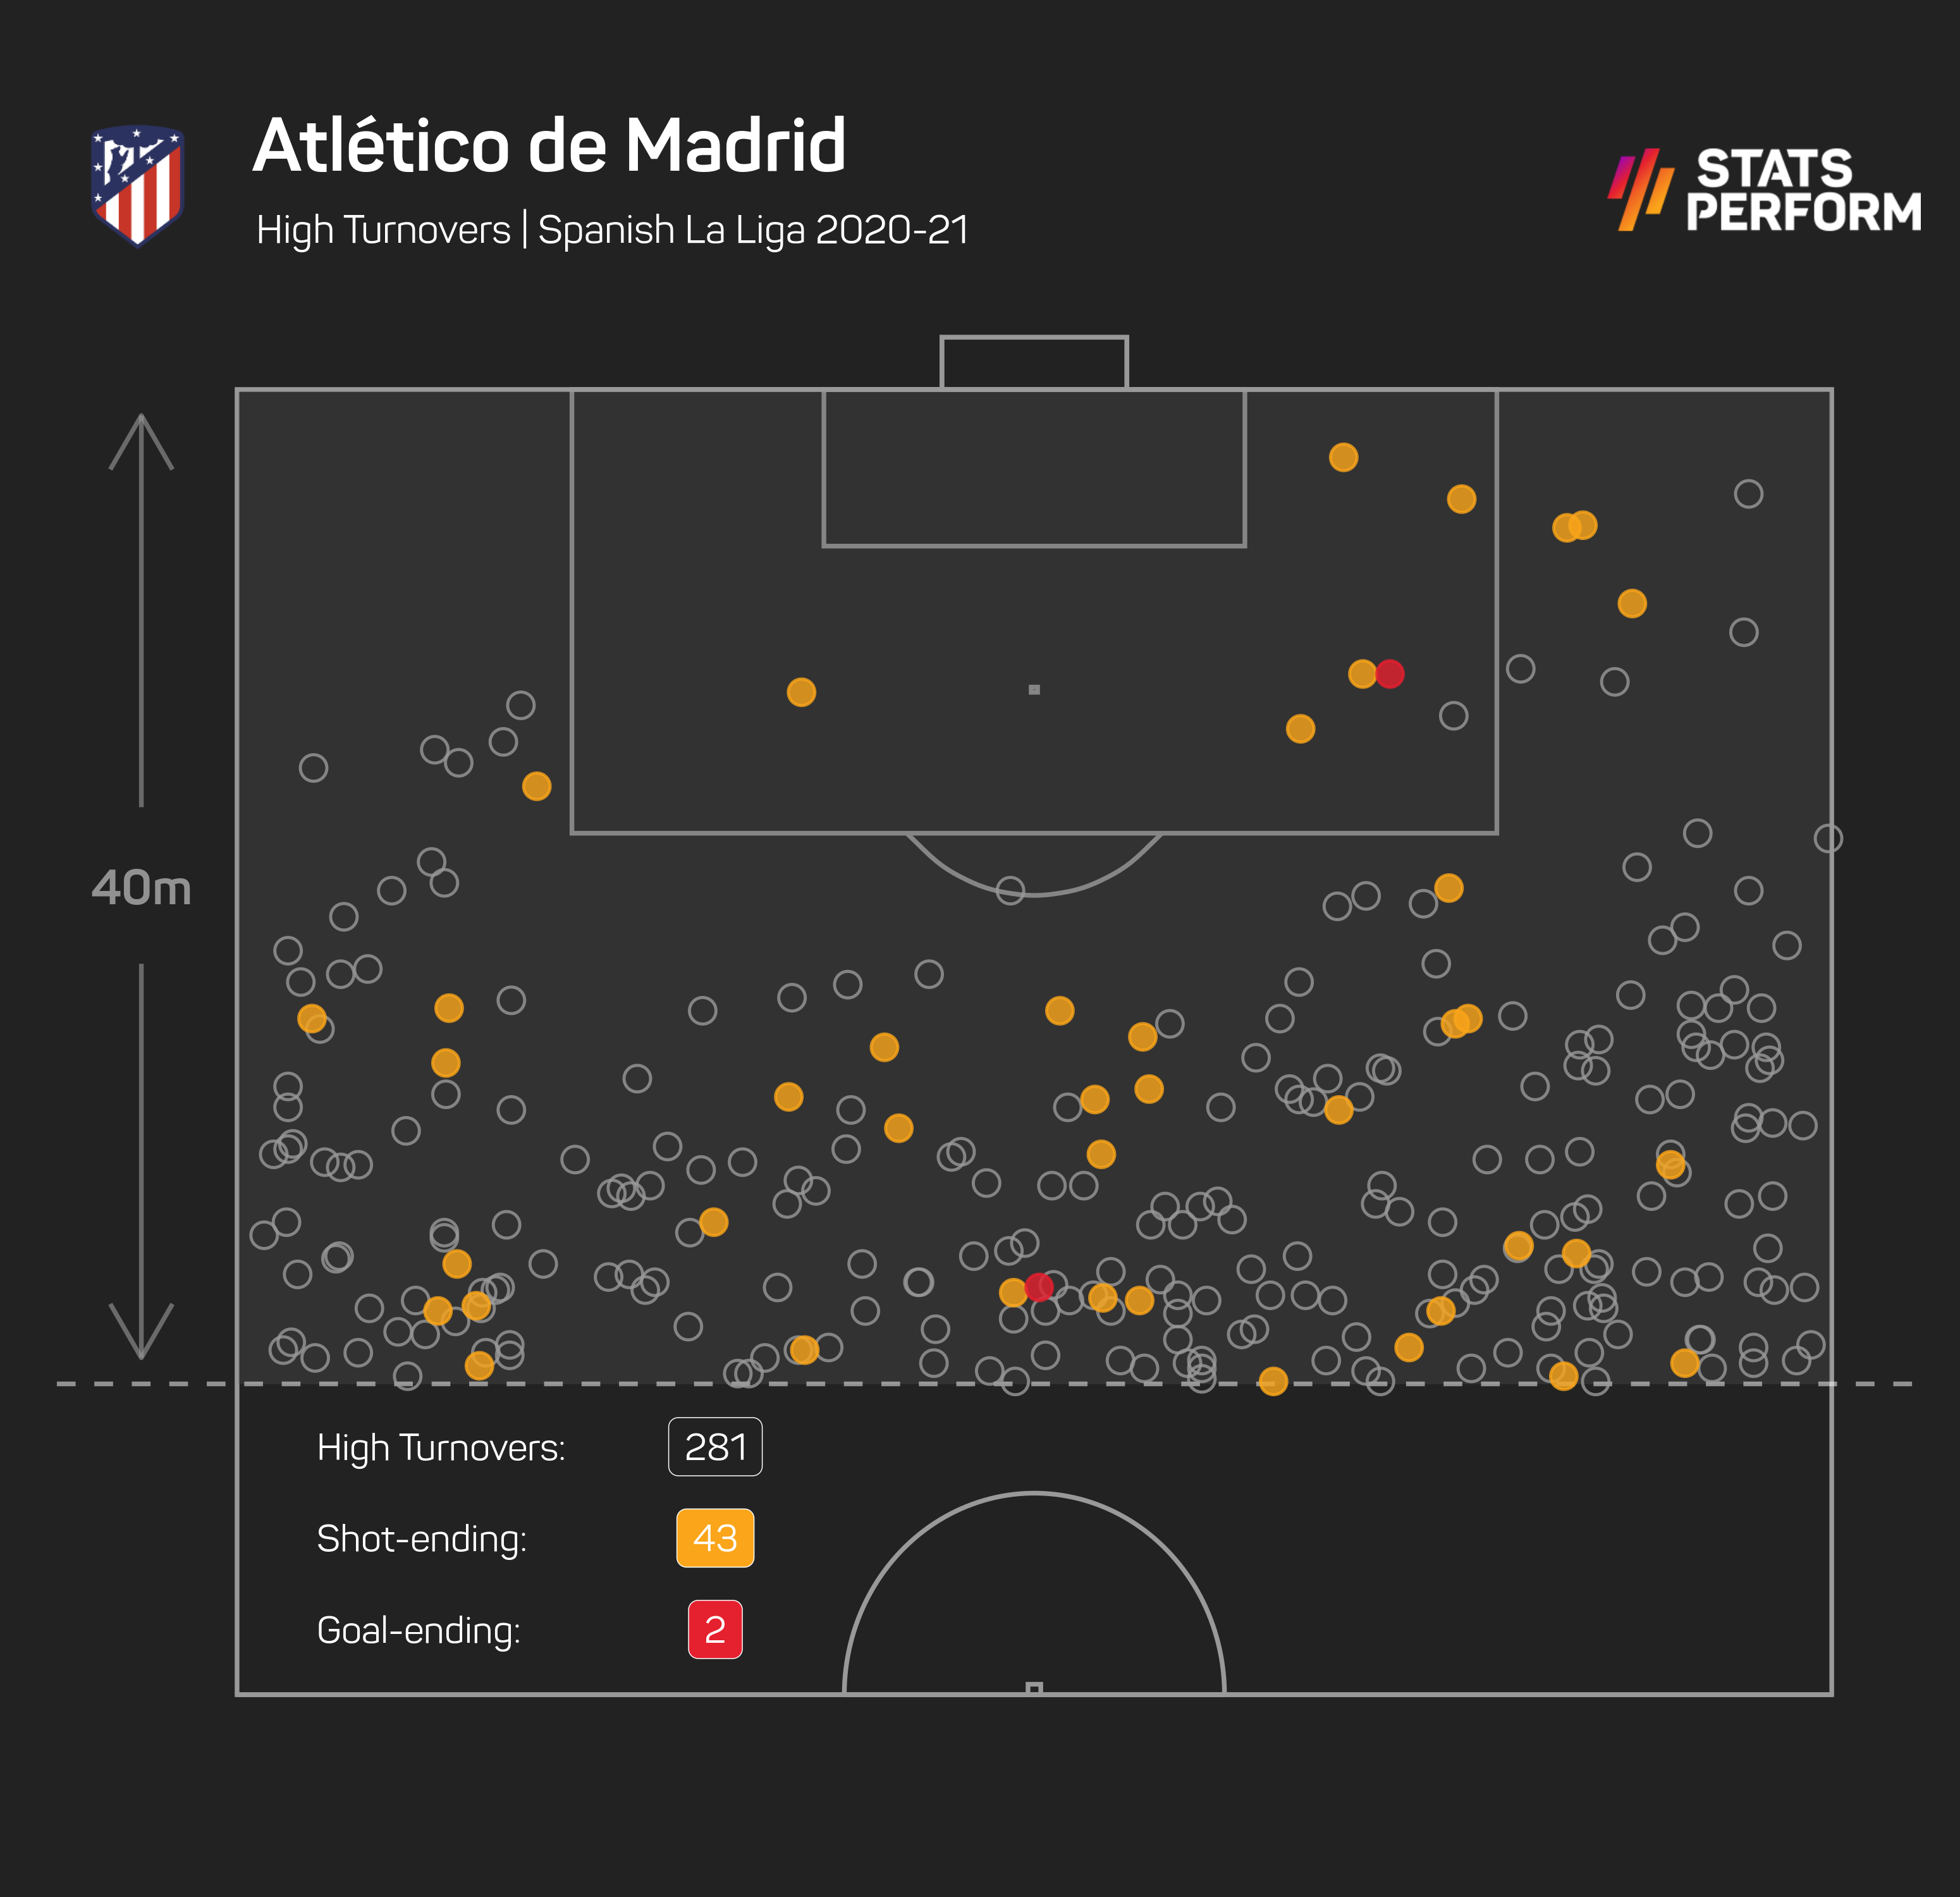 Atletico Madrid were effective at creating shooting chances after high turnovers